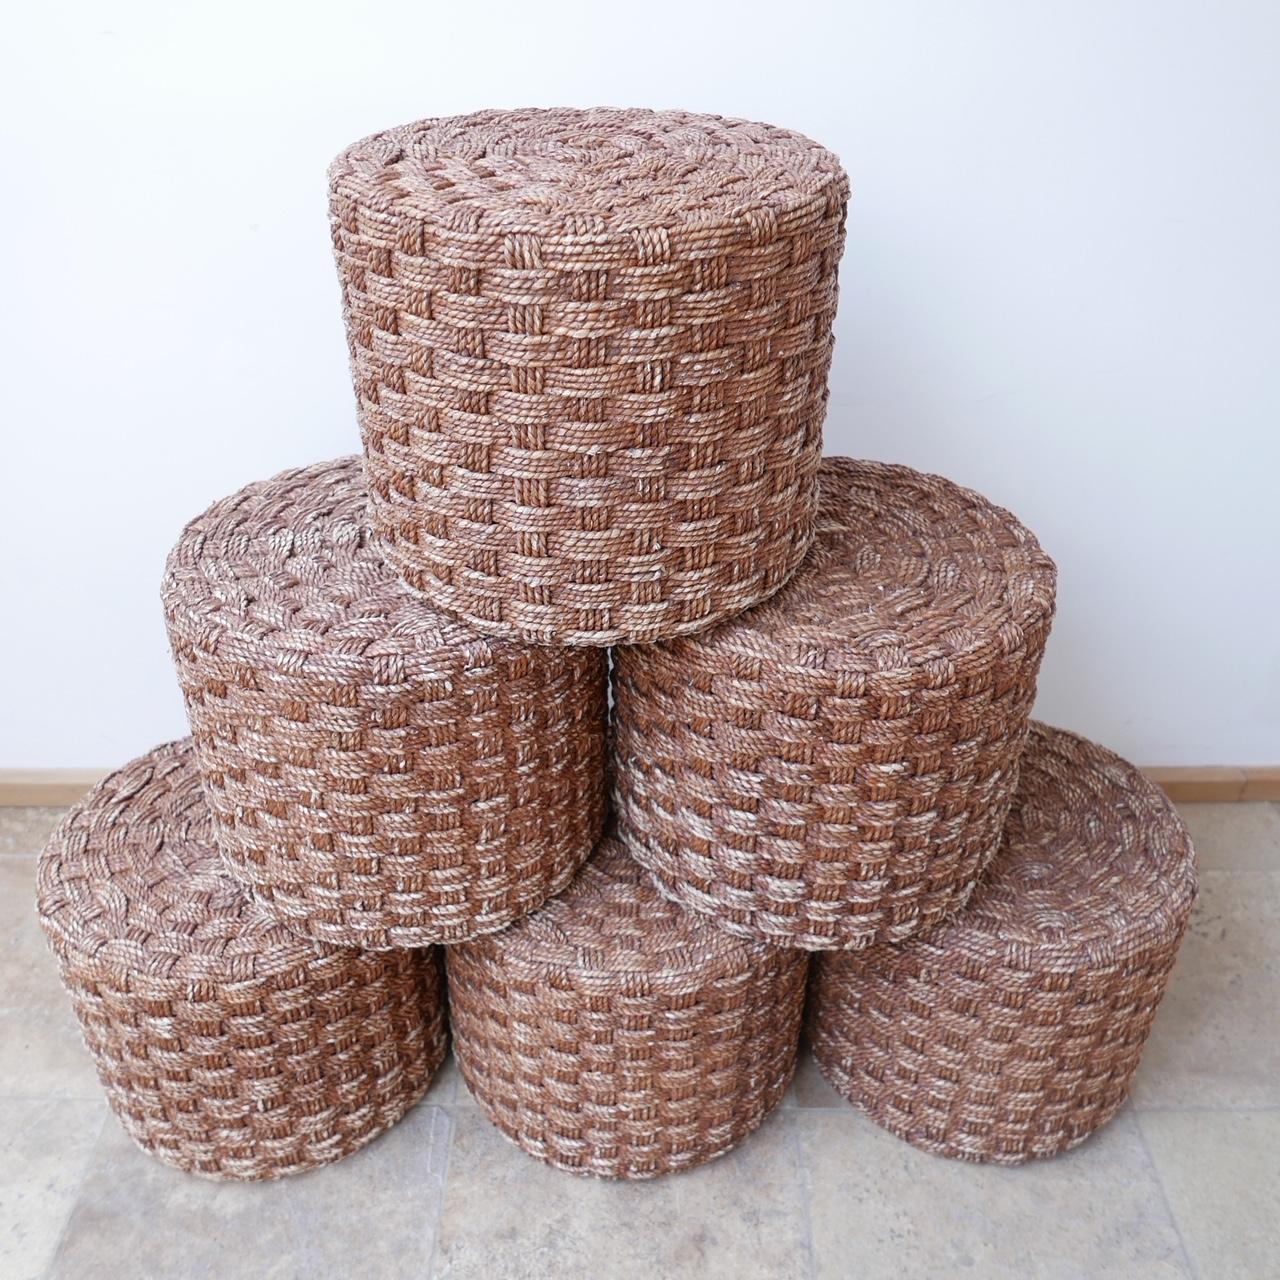 Rope work mid-century stools or side tables. 

Attributed to Audoux-Minet. 

France, c1960s. 

Good condition, wear commensurate with age. 

Priced and sold individually.

Six available. 

Dimensions: 36 height x 40 diameter in